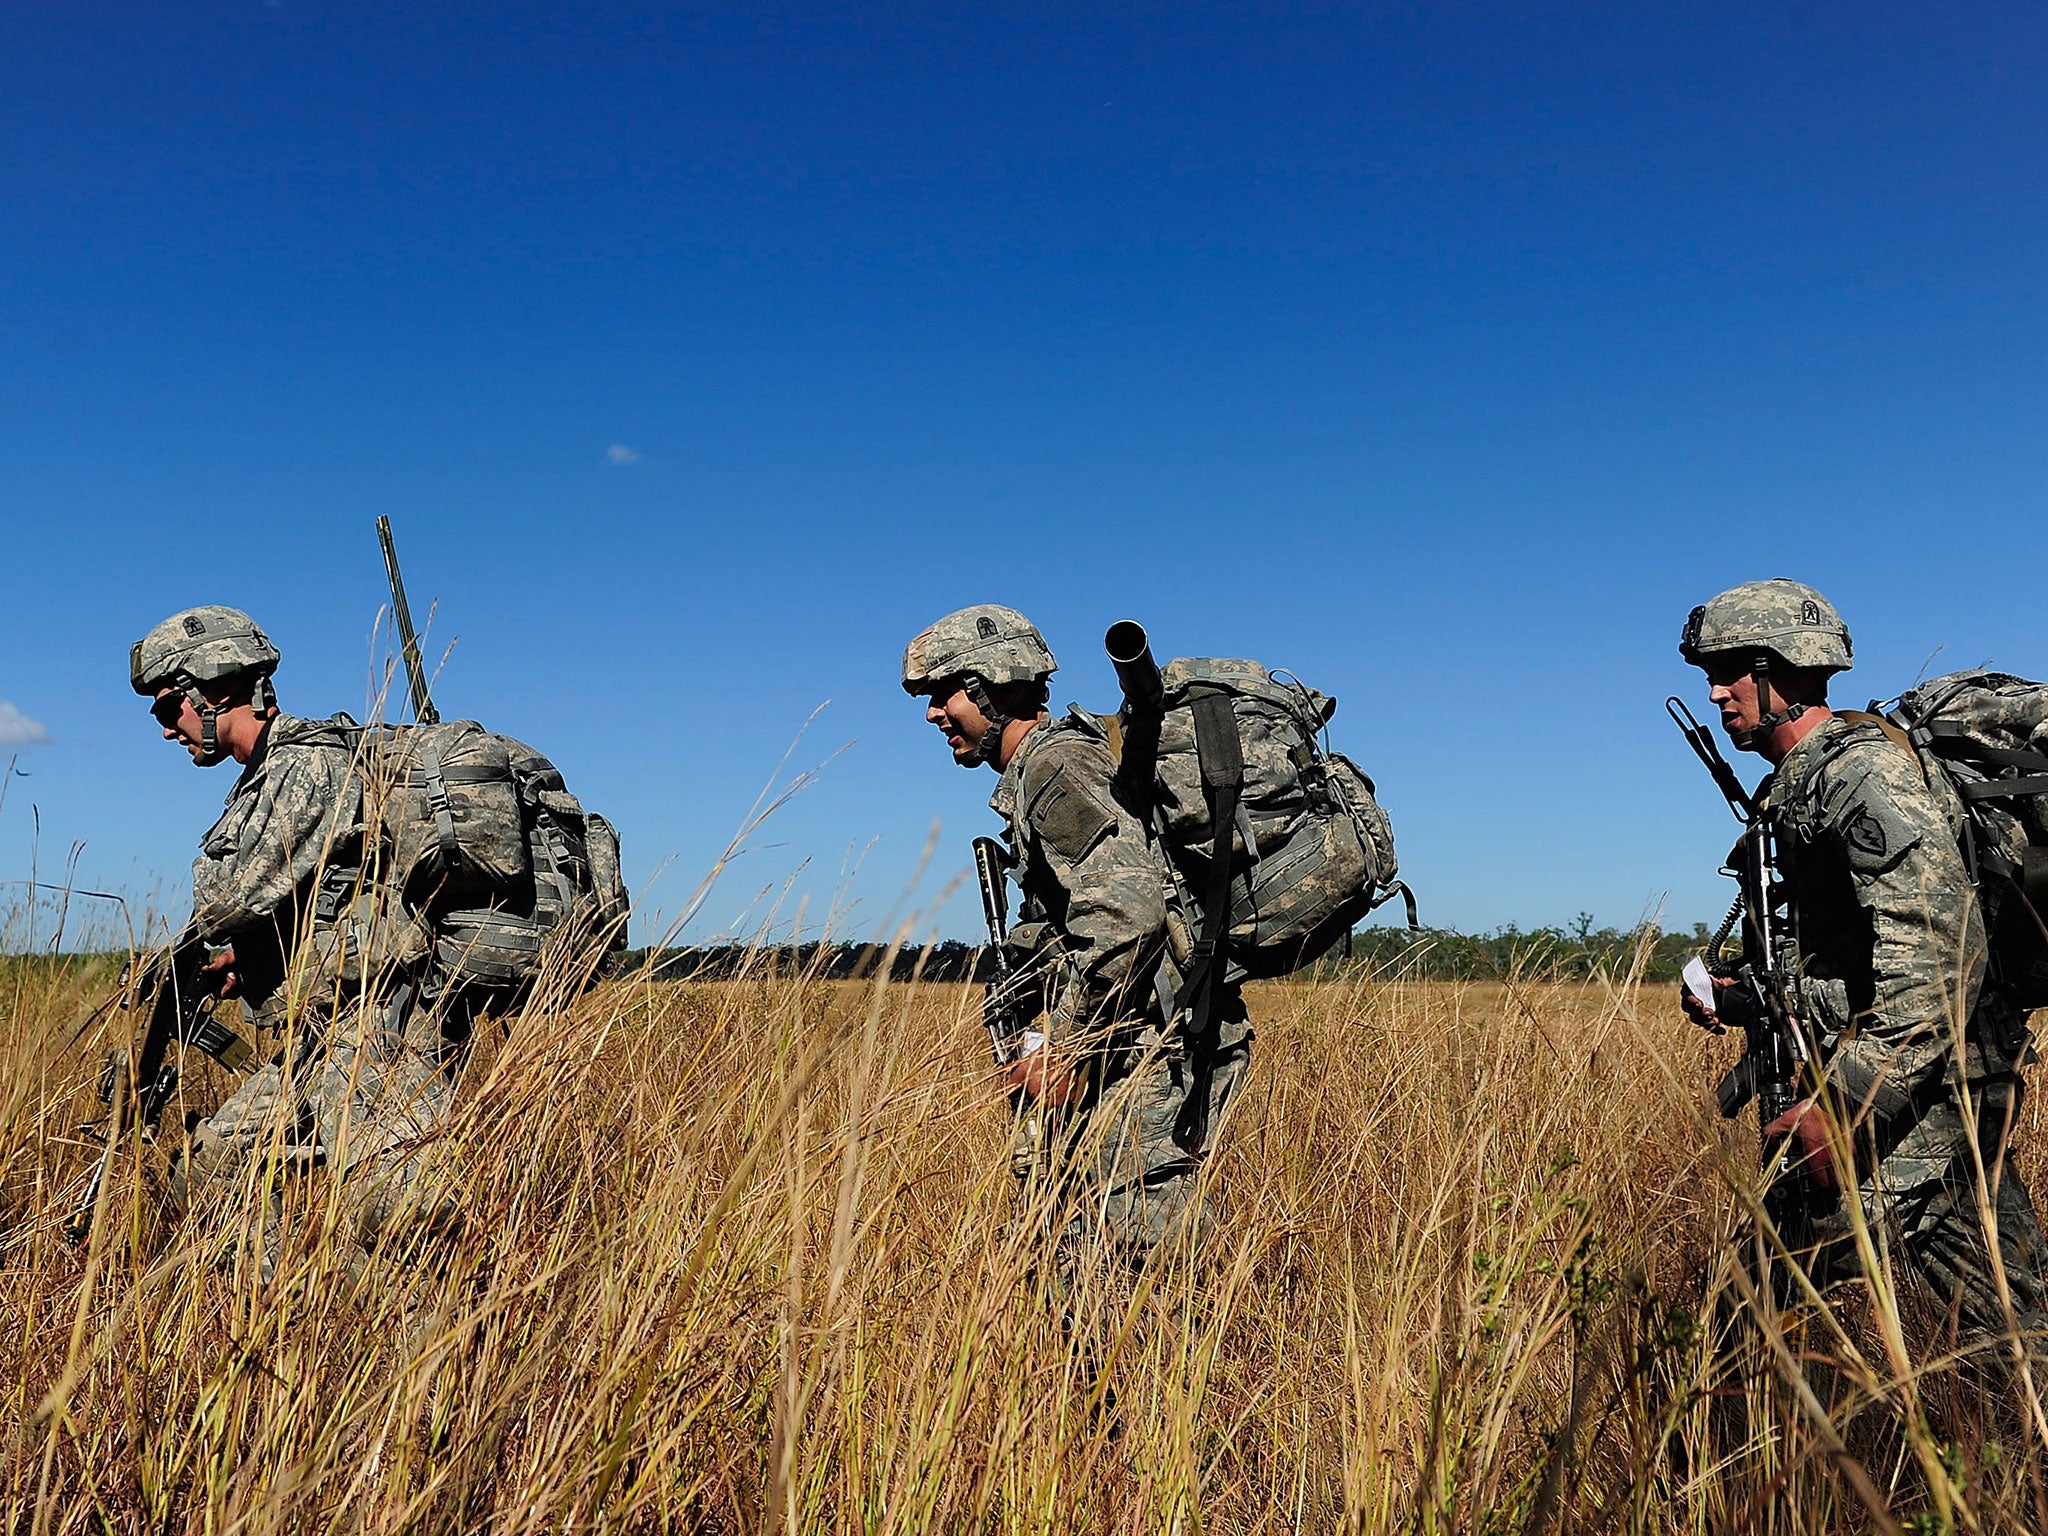 The US Army is likely going to reduce its number of active-duty soldiers down to 450,000